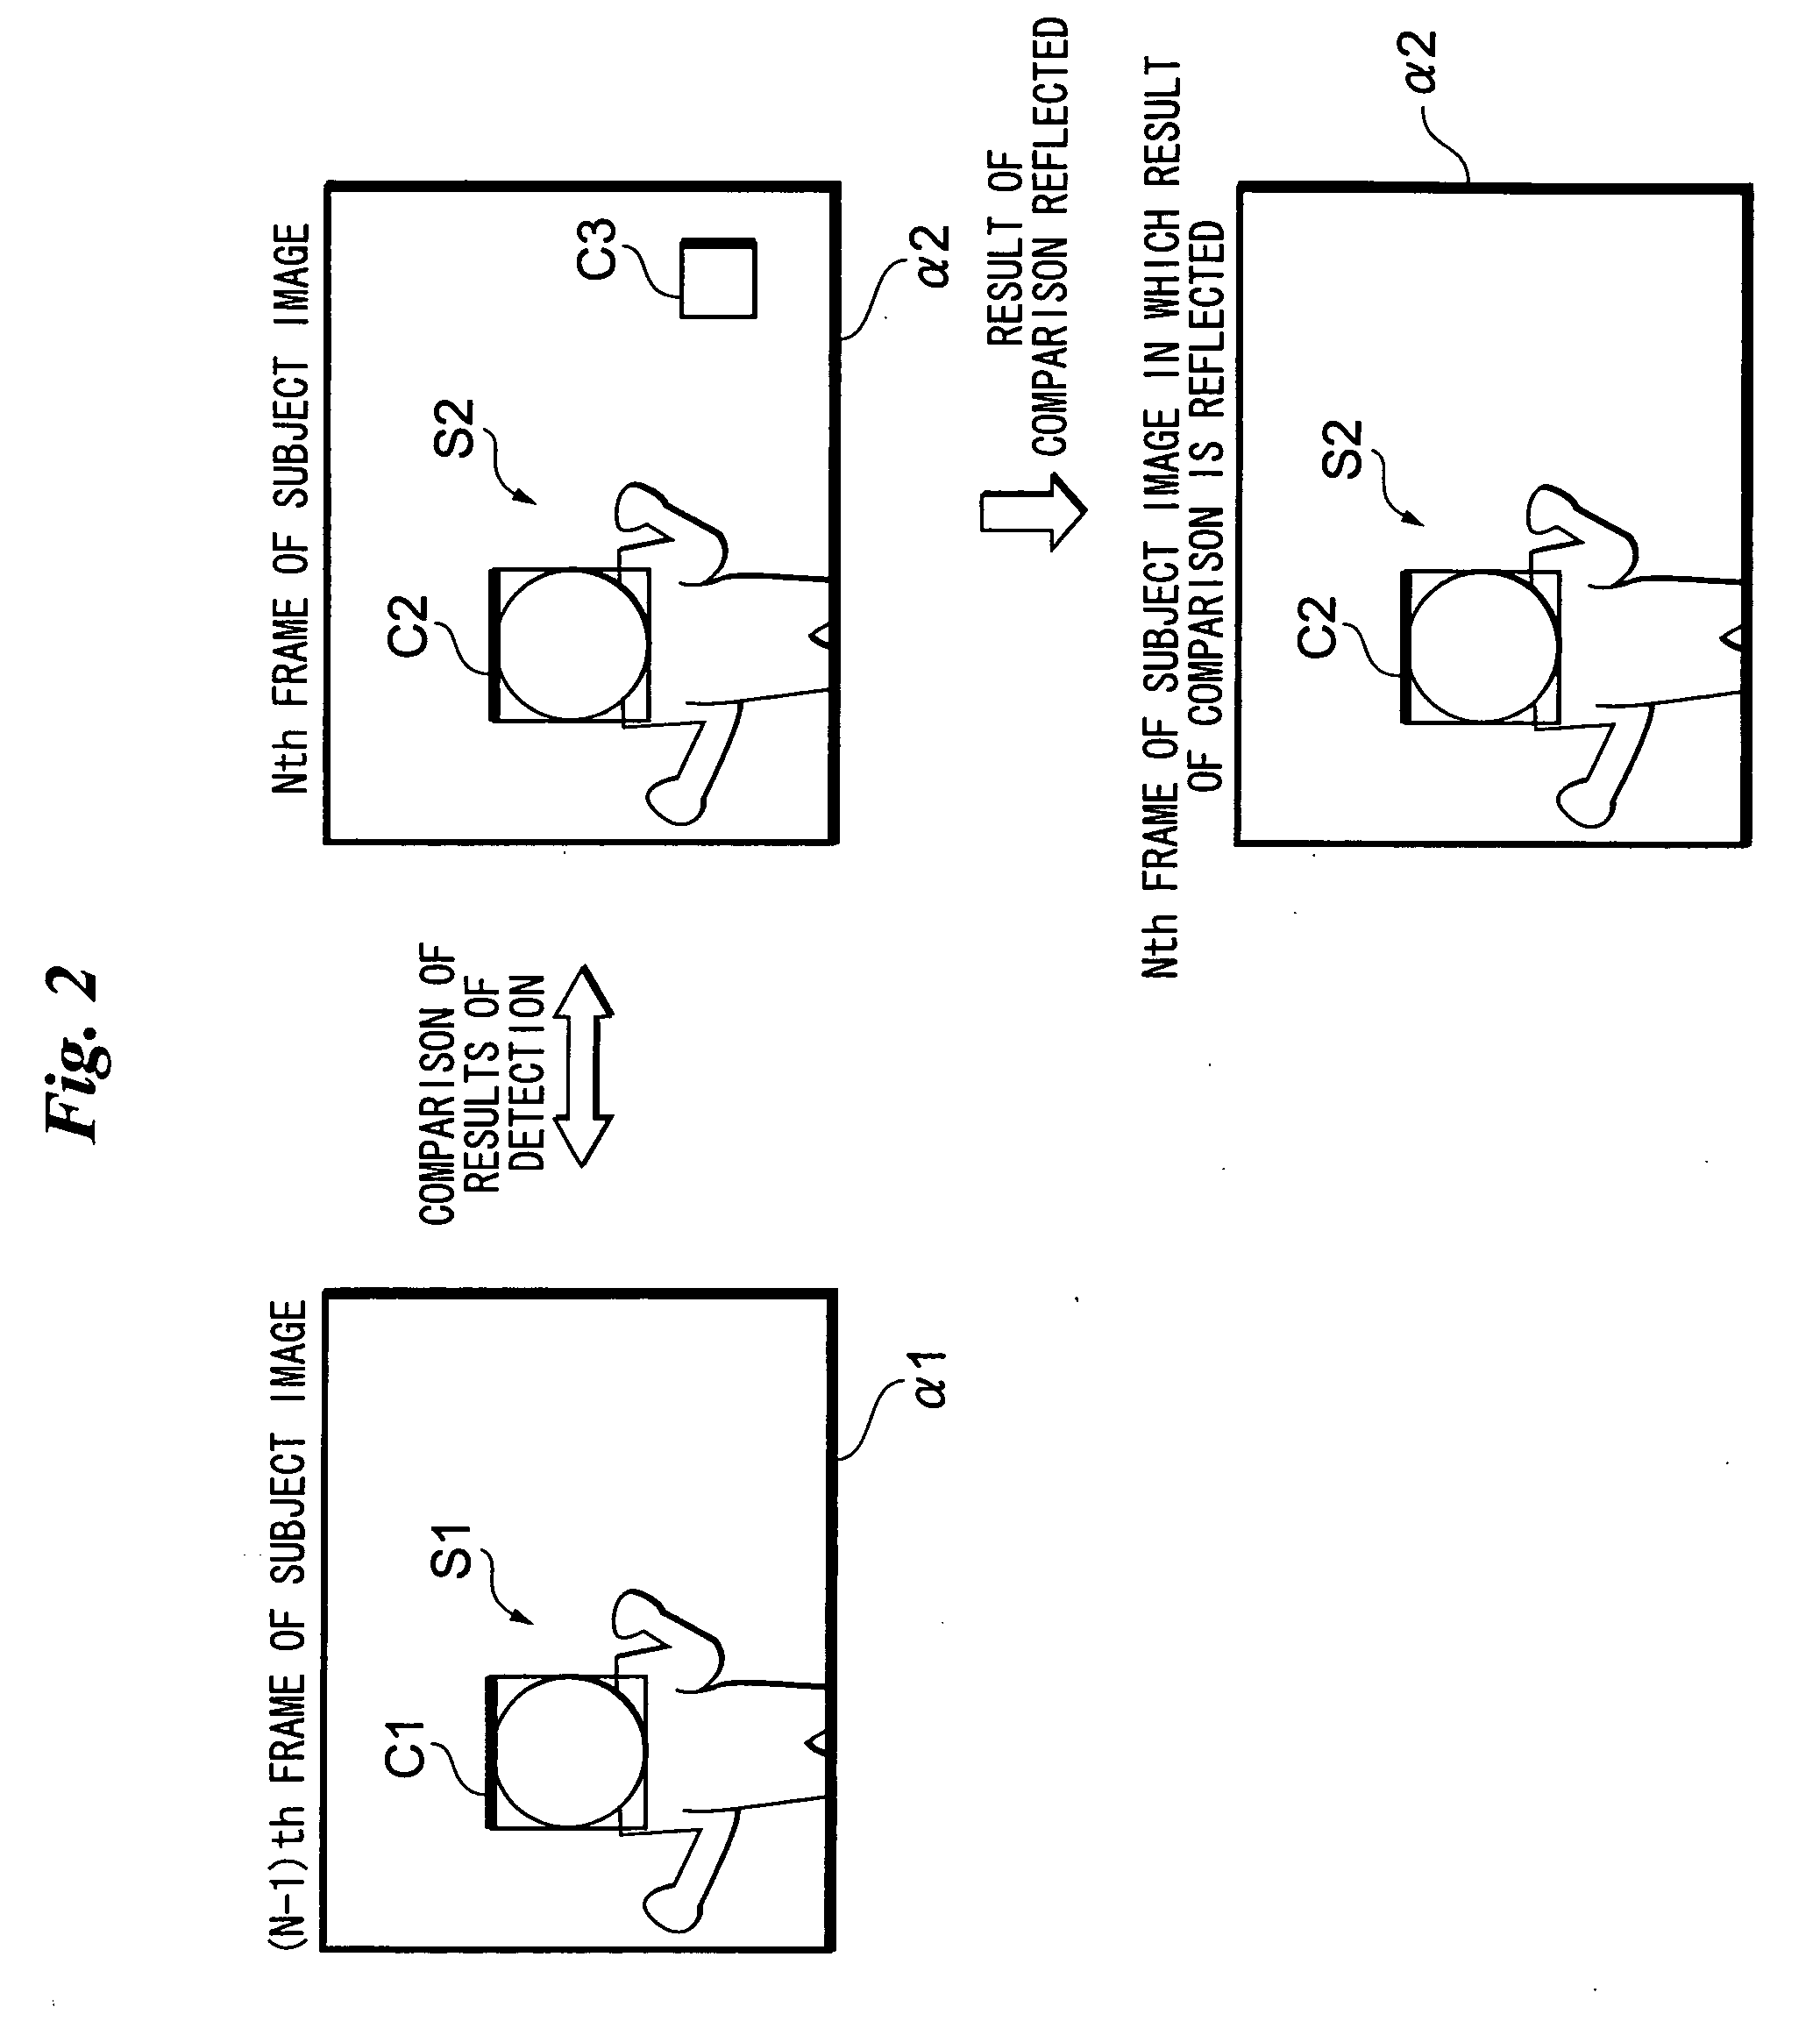 Target-image position detecting apparatus, method and program for controlling said apparatus